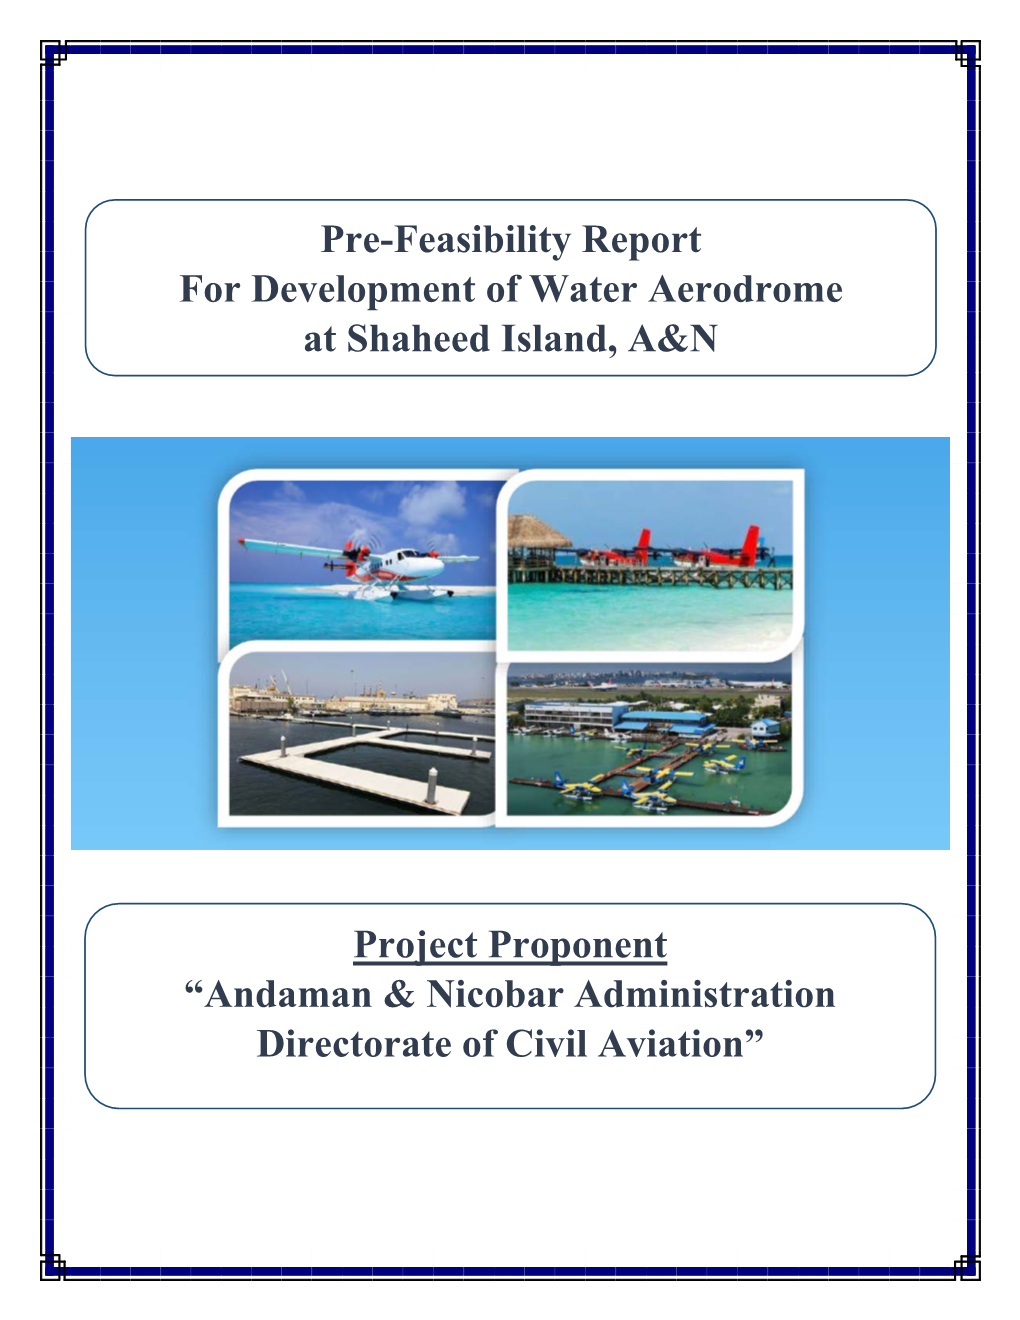 Project Proponent “Andaman & Nicobar Administration Directorate of Civil Aviation” Pre-Feasibility Report for Developmen